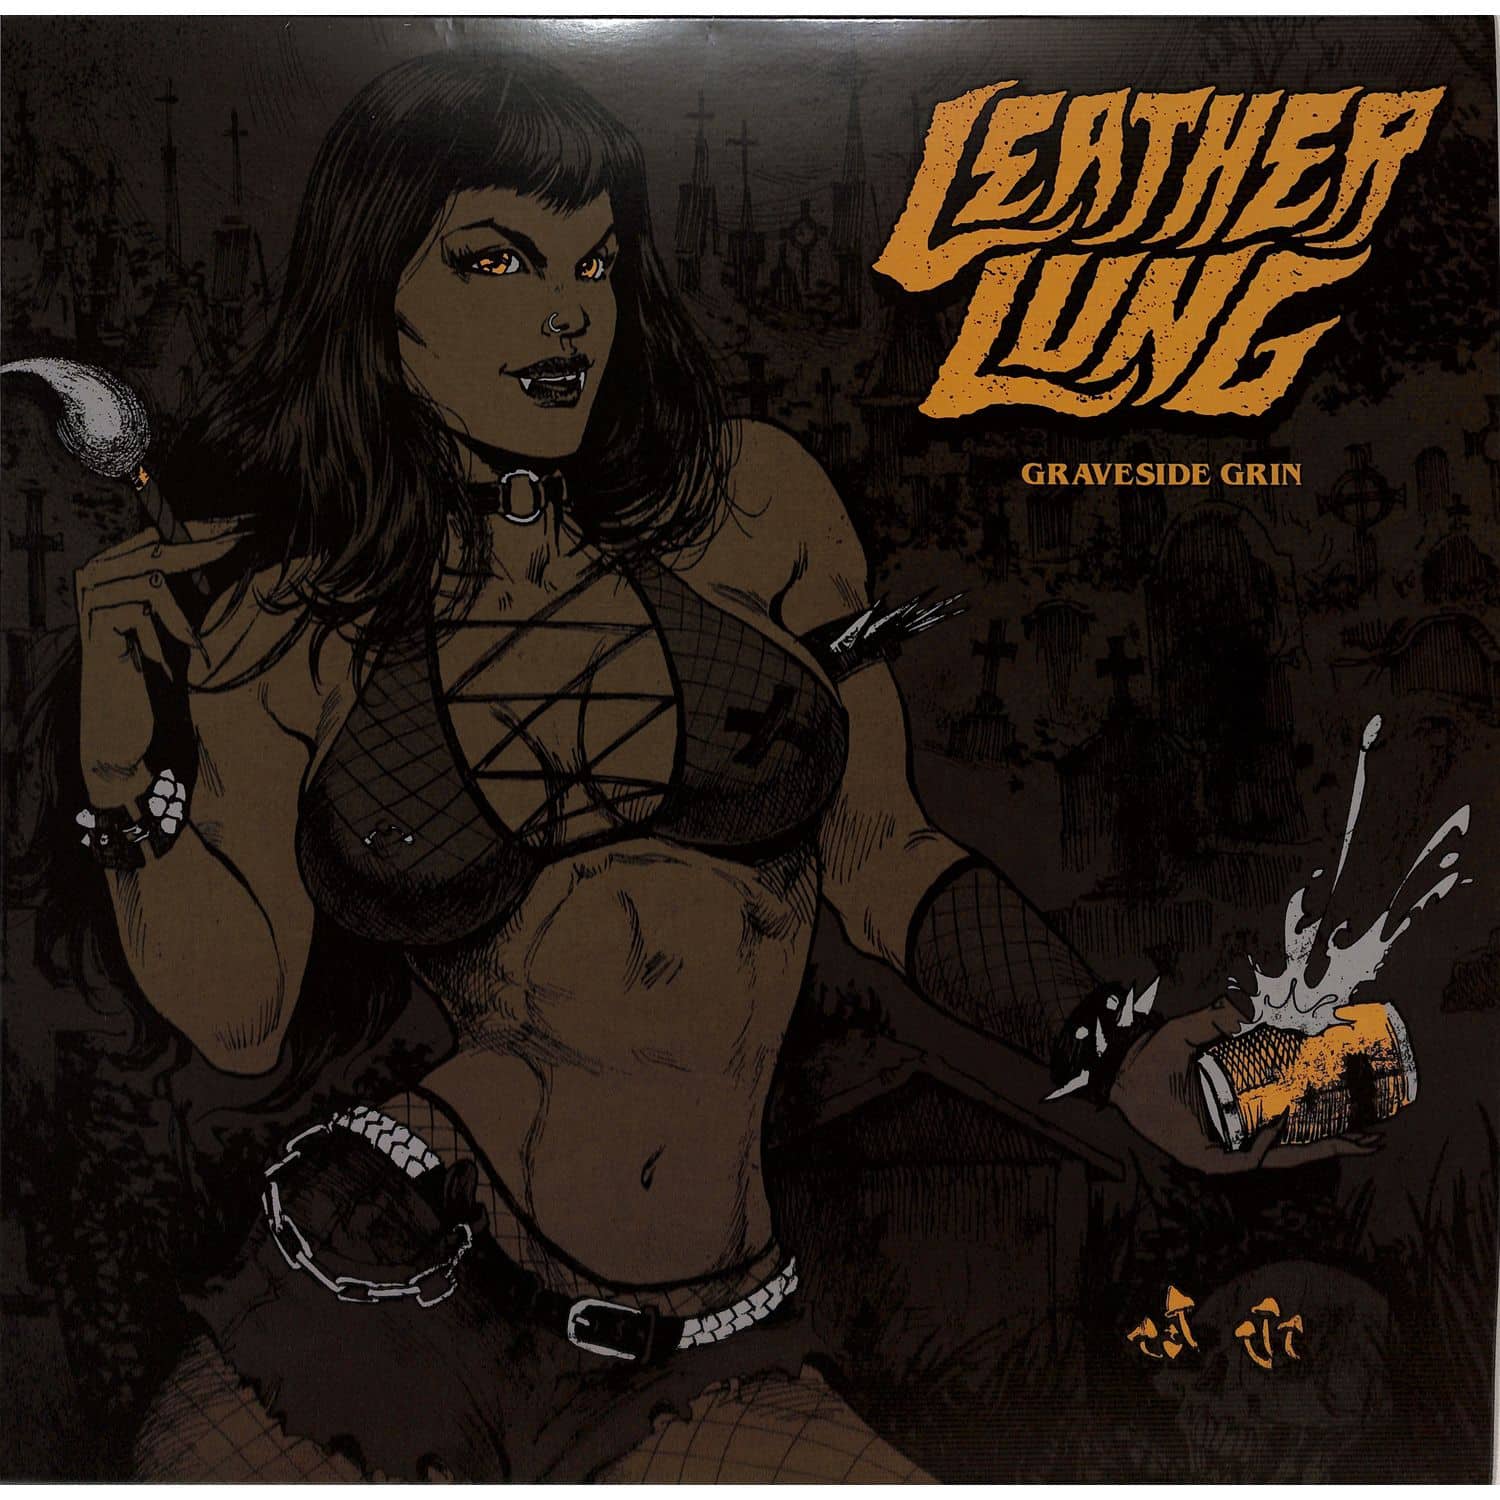 Leather Lung - GRAVESIDE GRIN 